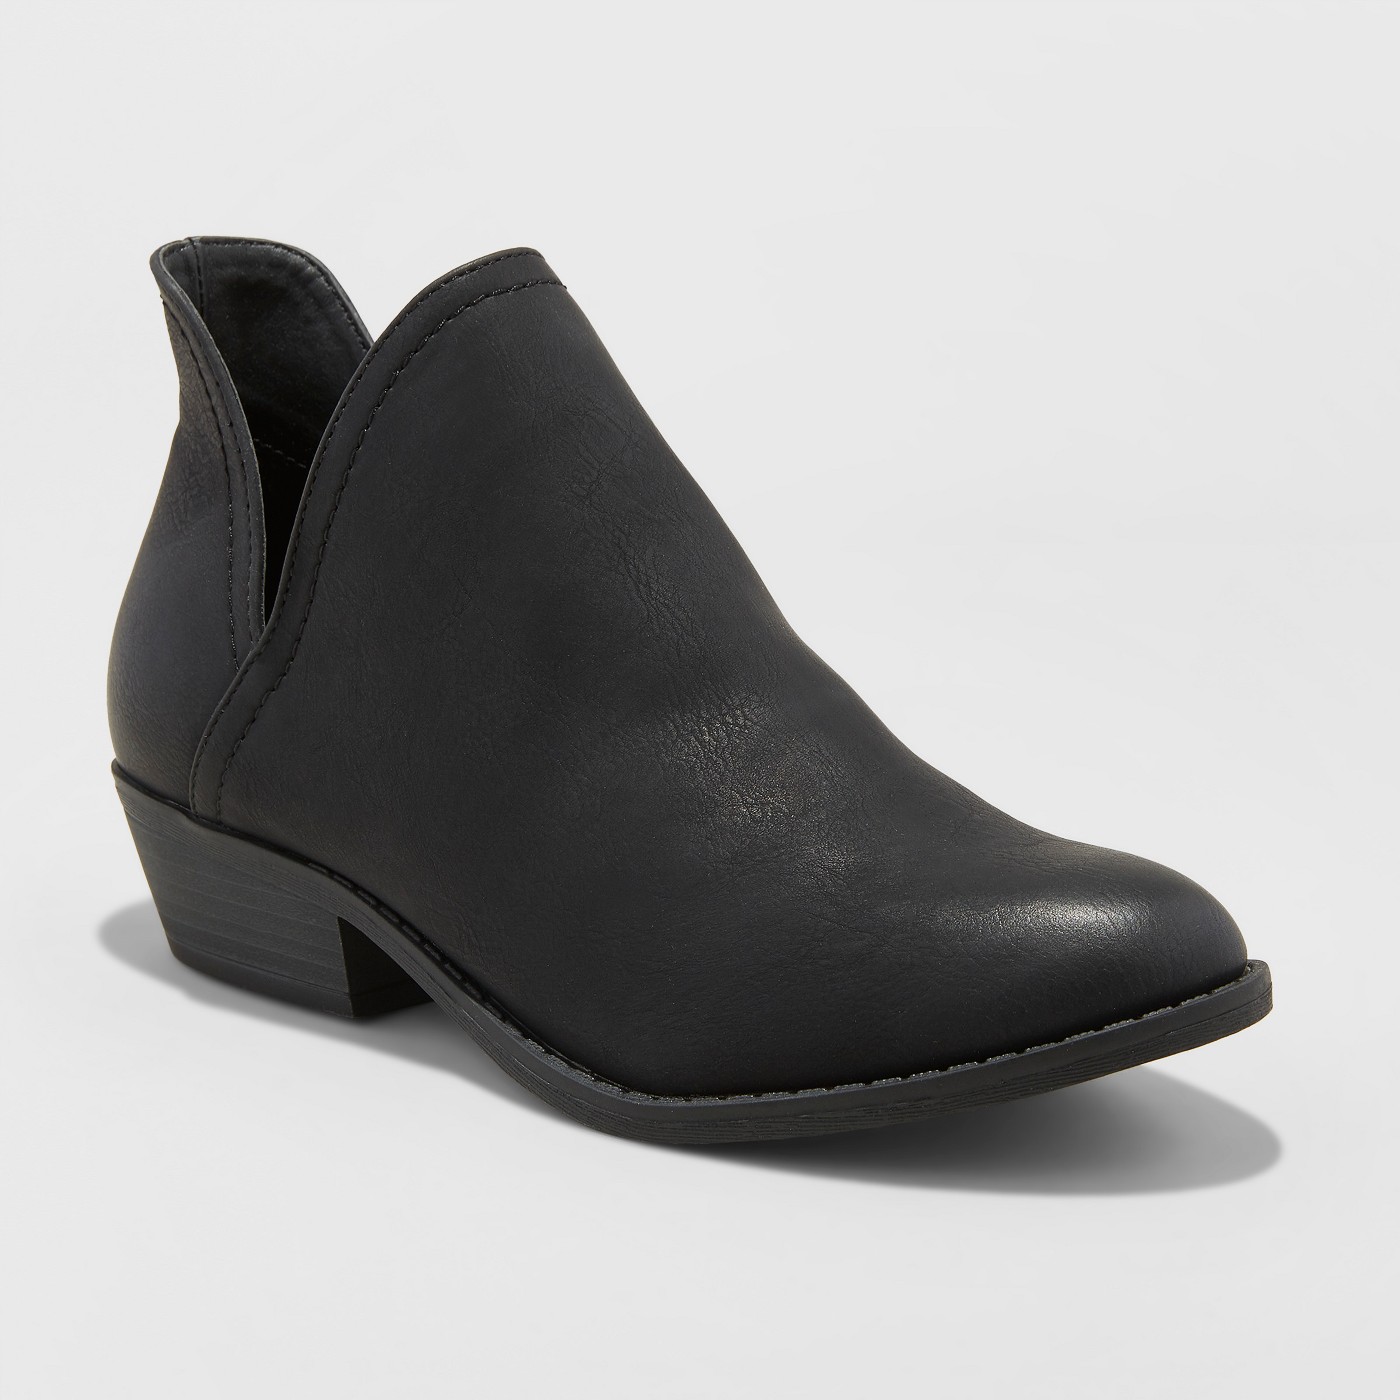 Women's Nora V-Cut Ankle Booties - Universal Thread™ - image 1 of 4